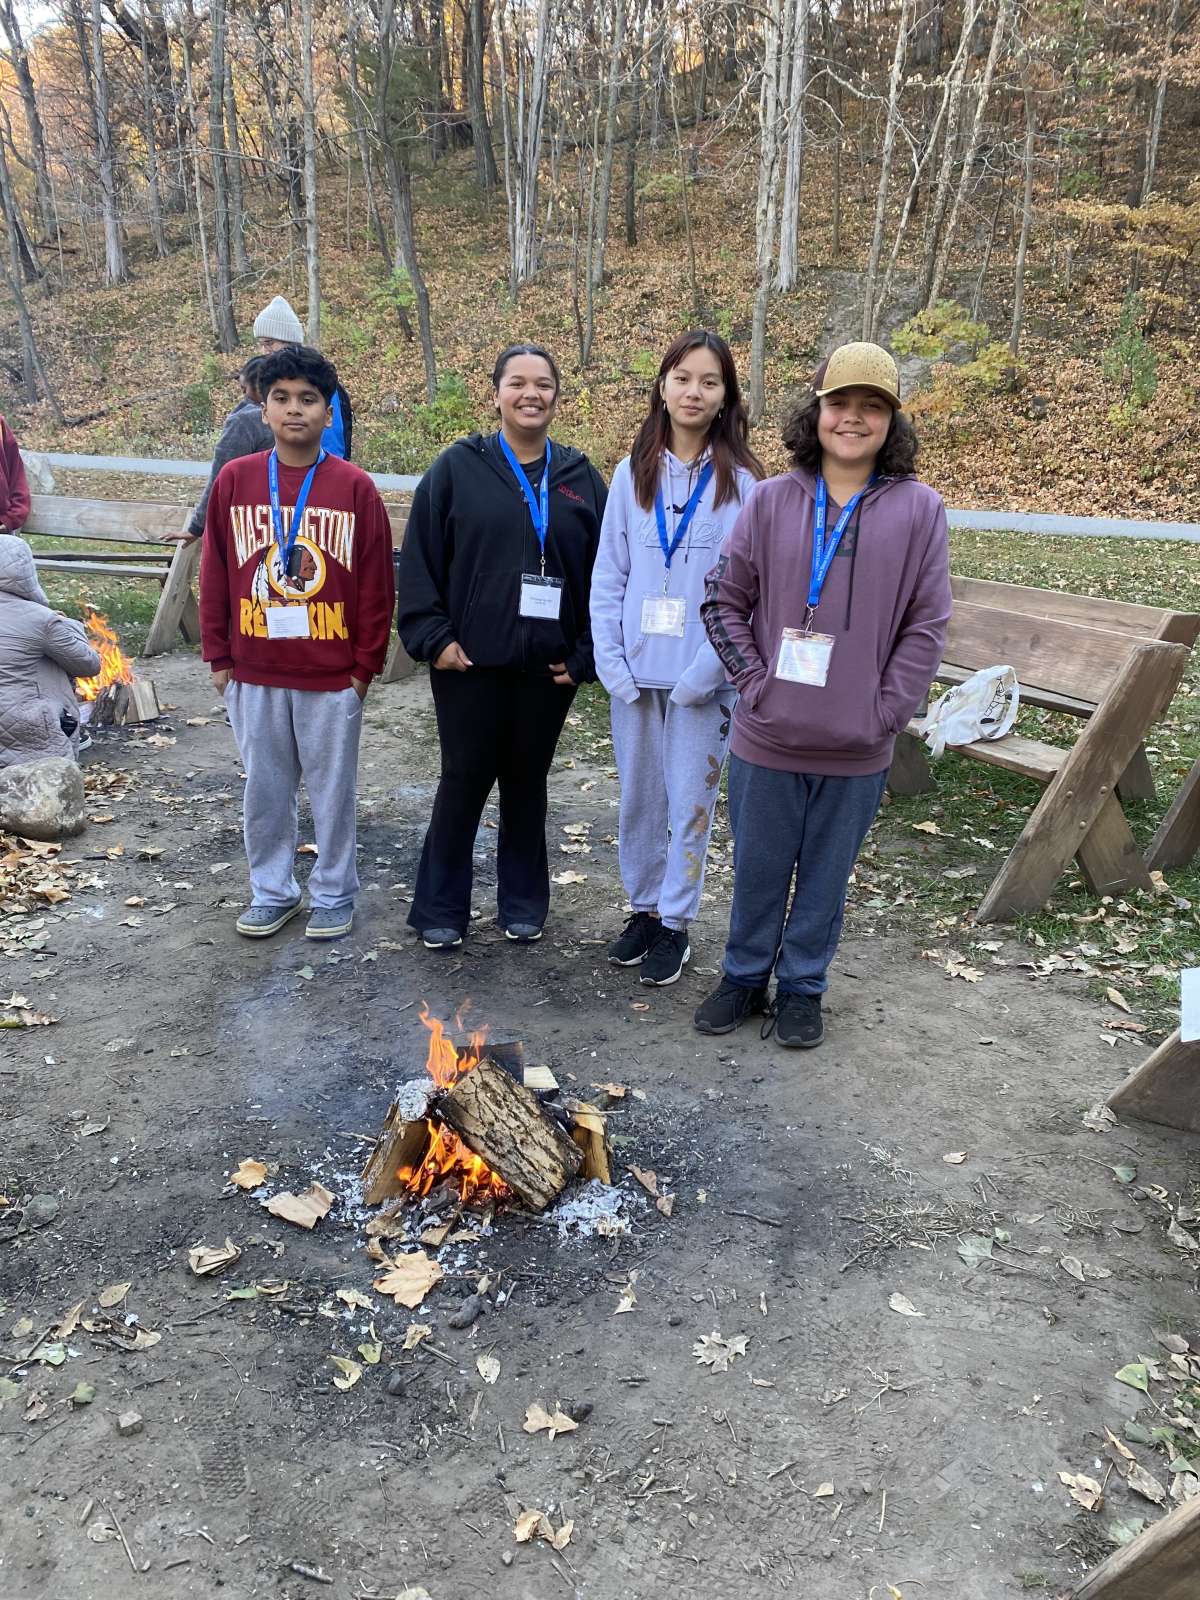 Four Science Bound Students standing behind the fire they built.